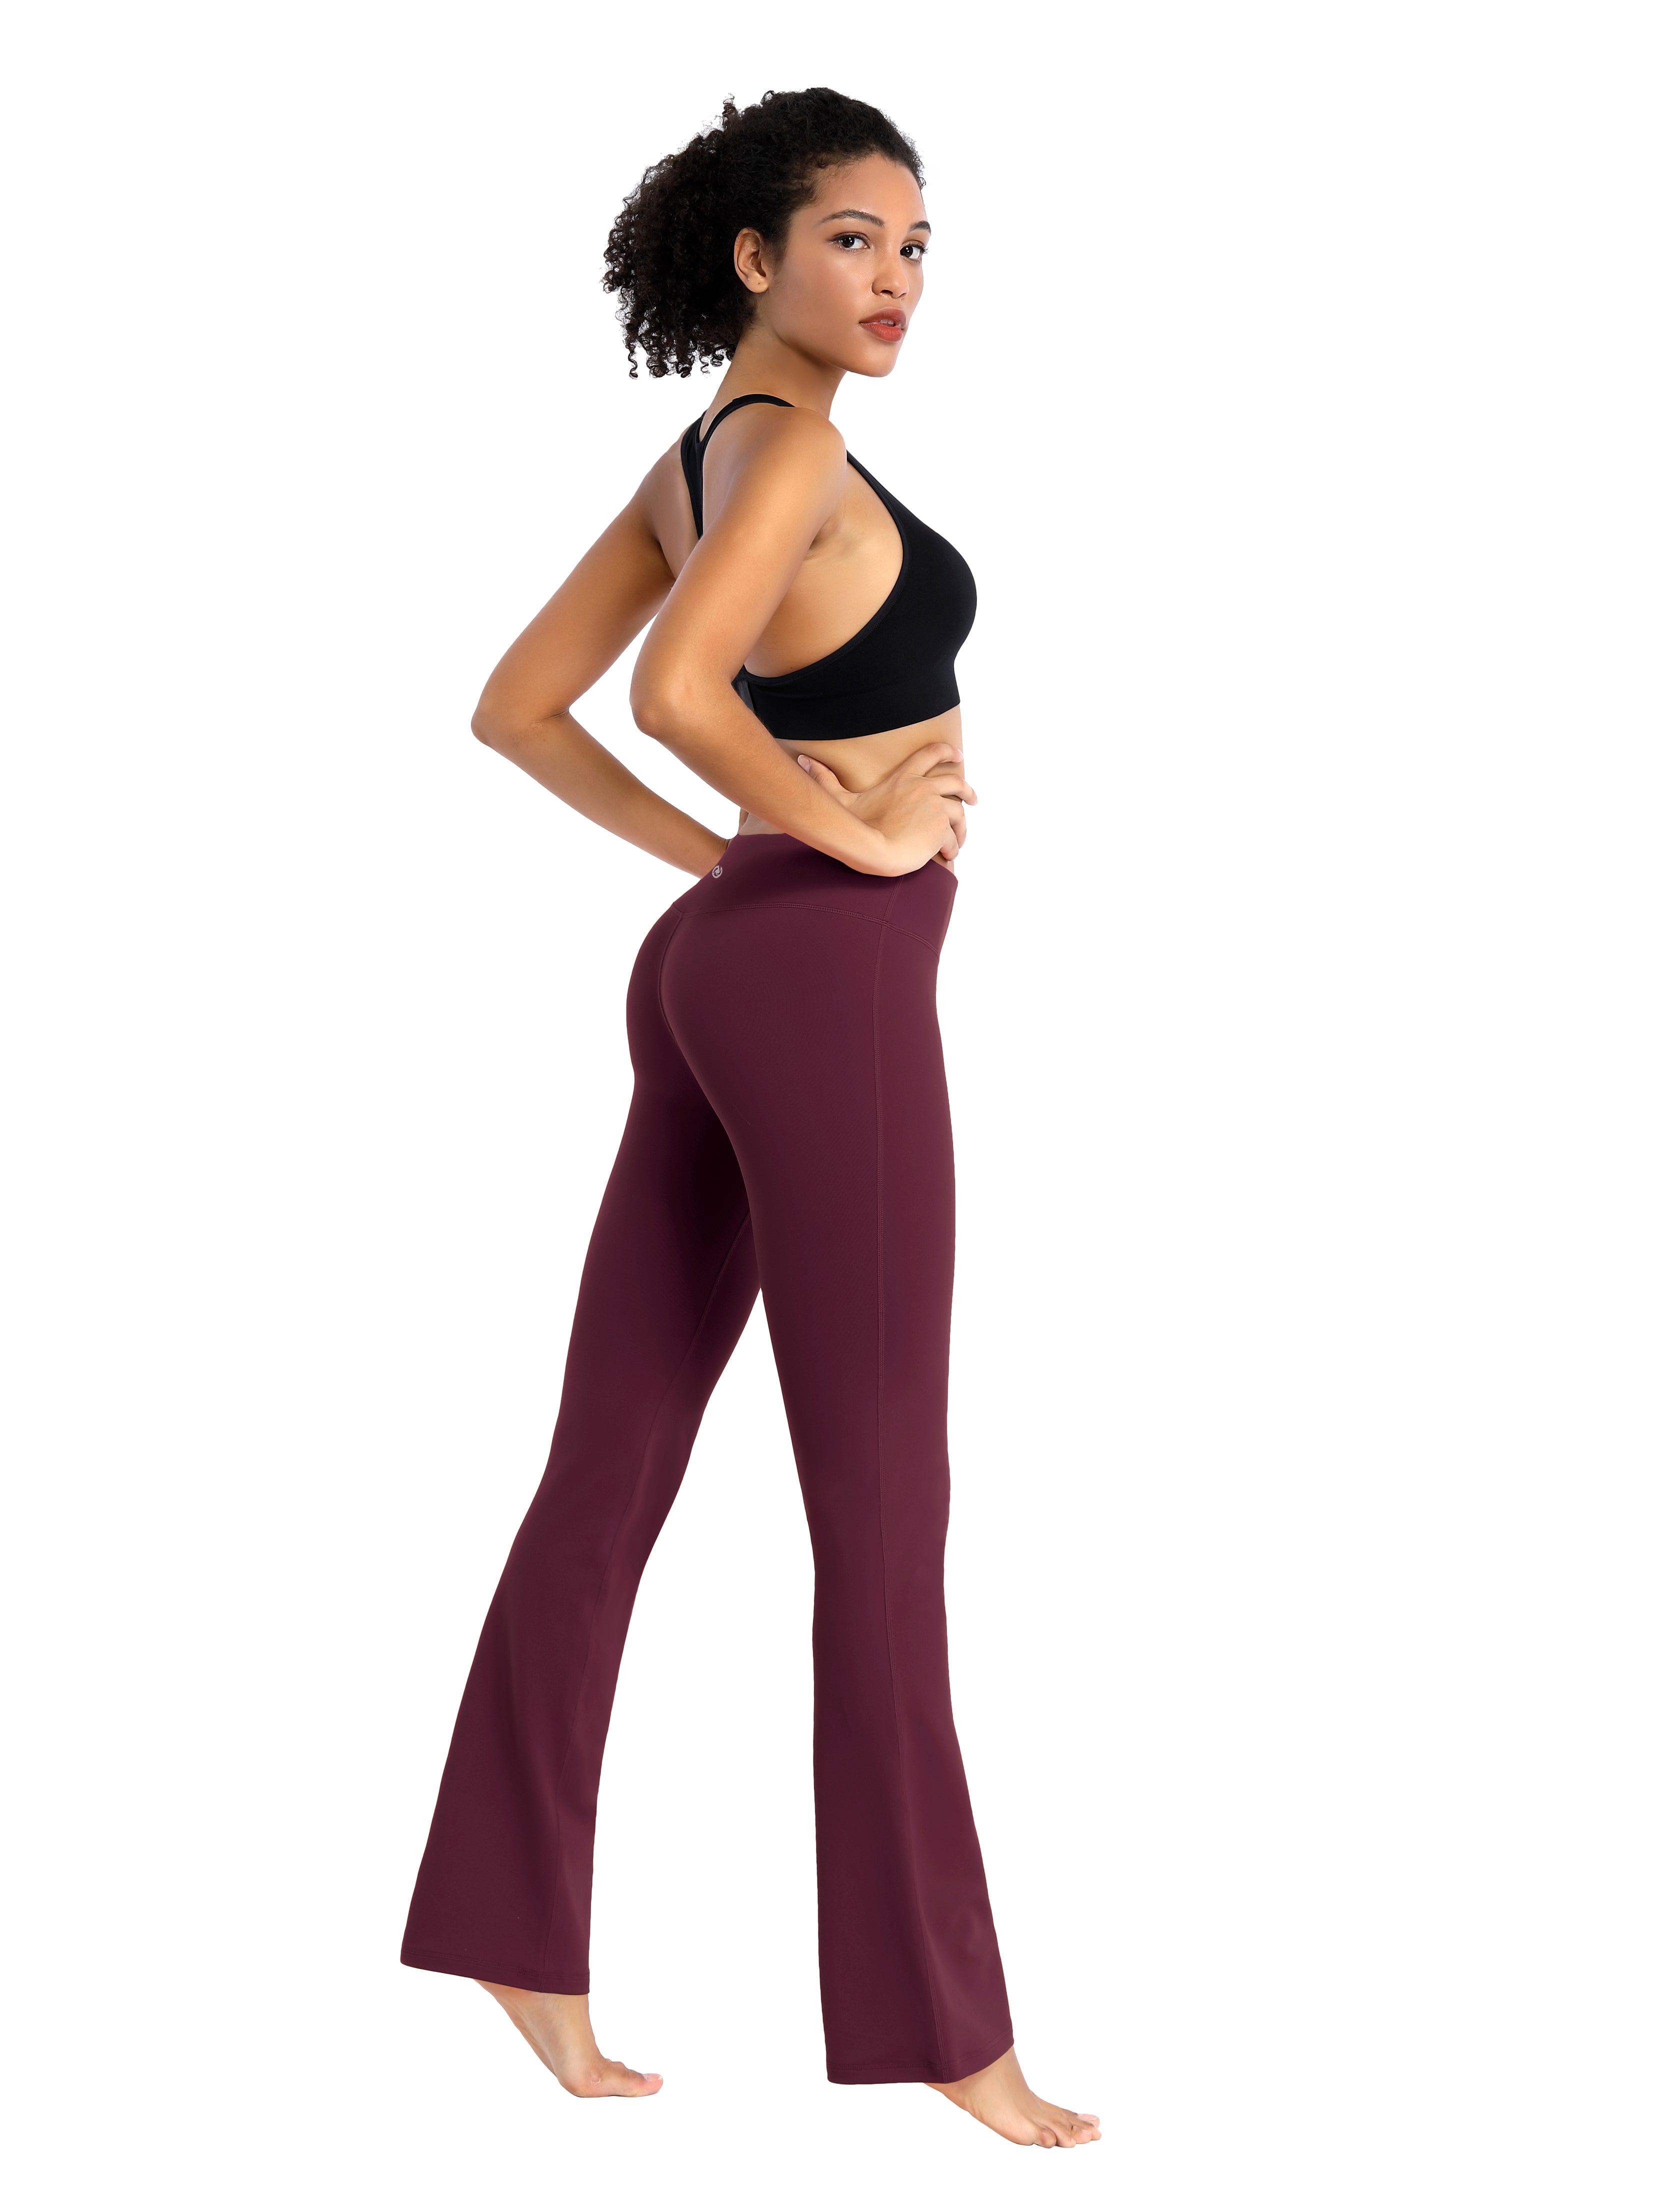 Cotton Nylon Bootcut Leggings grapevine 87%Nylon/13%Spandex (Super soft, cotton feel , 280gsm) Fabric doesn't attract lint easily 4-way stretch No see-through Moisture-wicking Inner pocket Four lengths